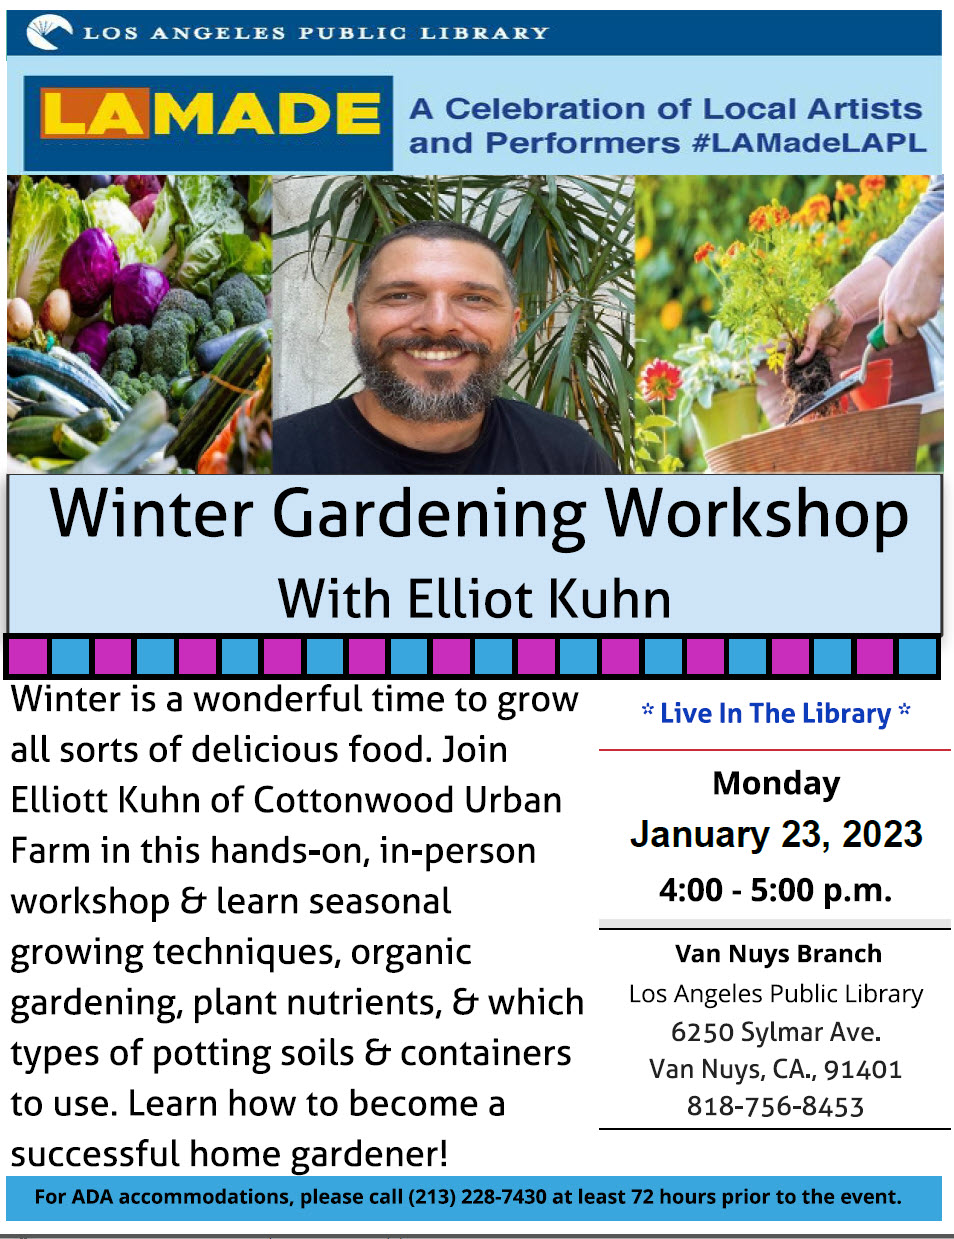 Winter Gardening Workshop at the Library